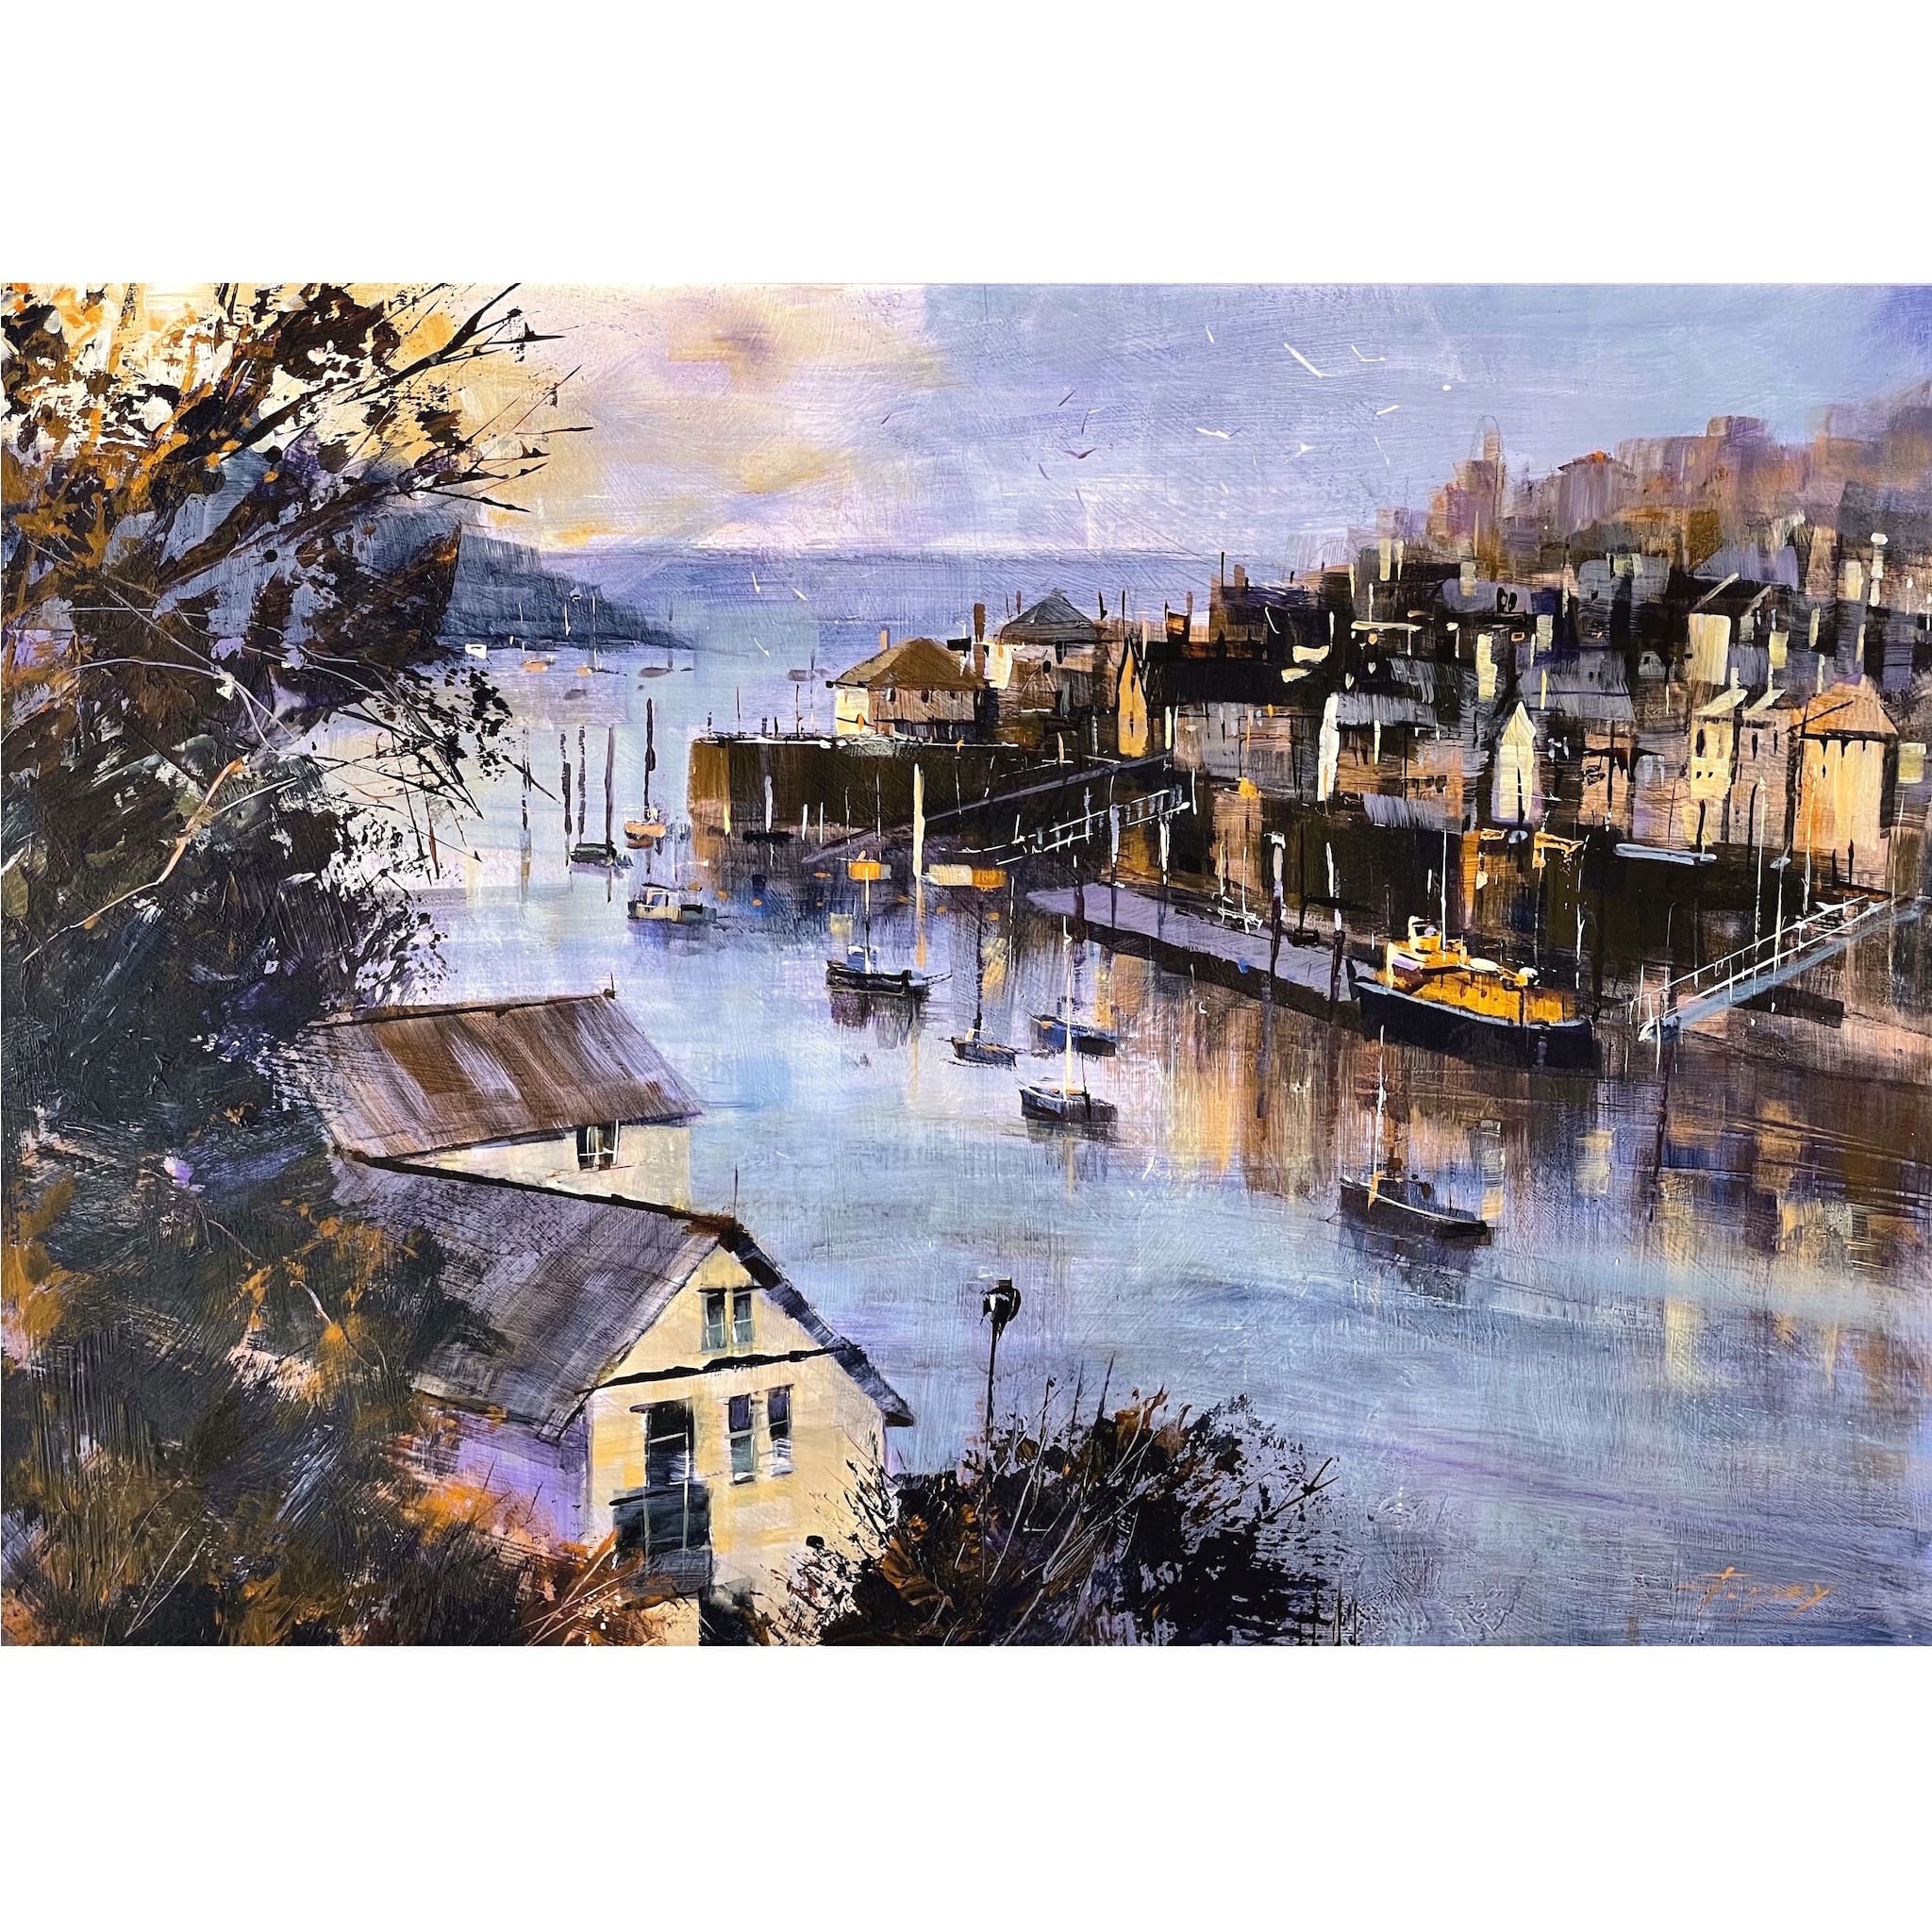 Painting of the sun rising over Fowey, Cornwall by artist Chris Forsey